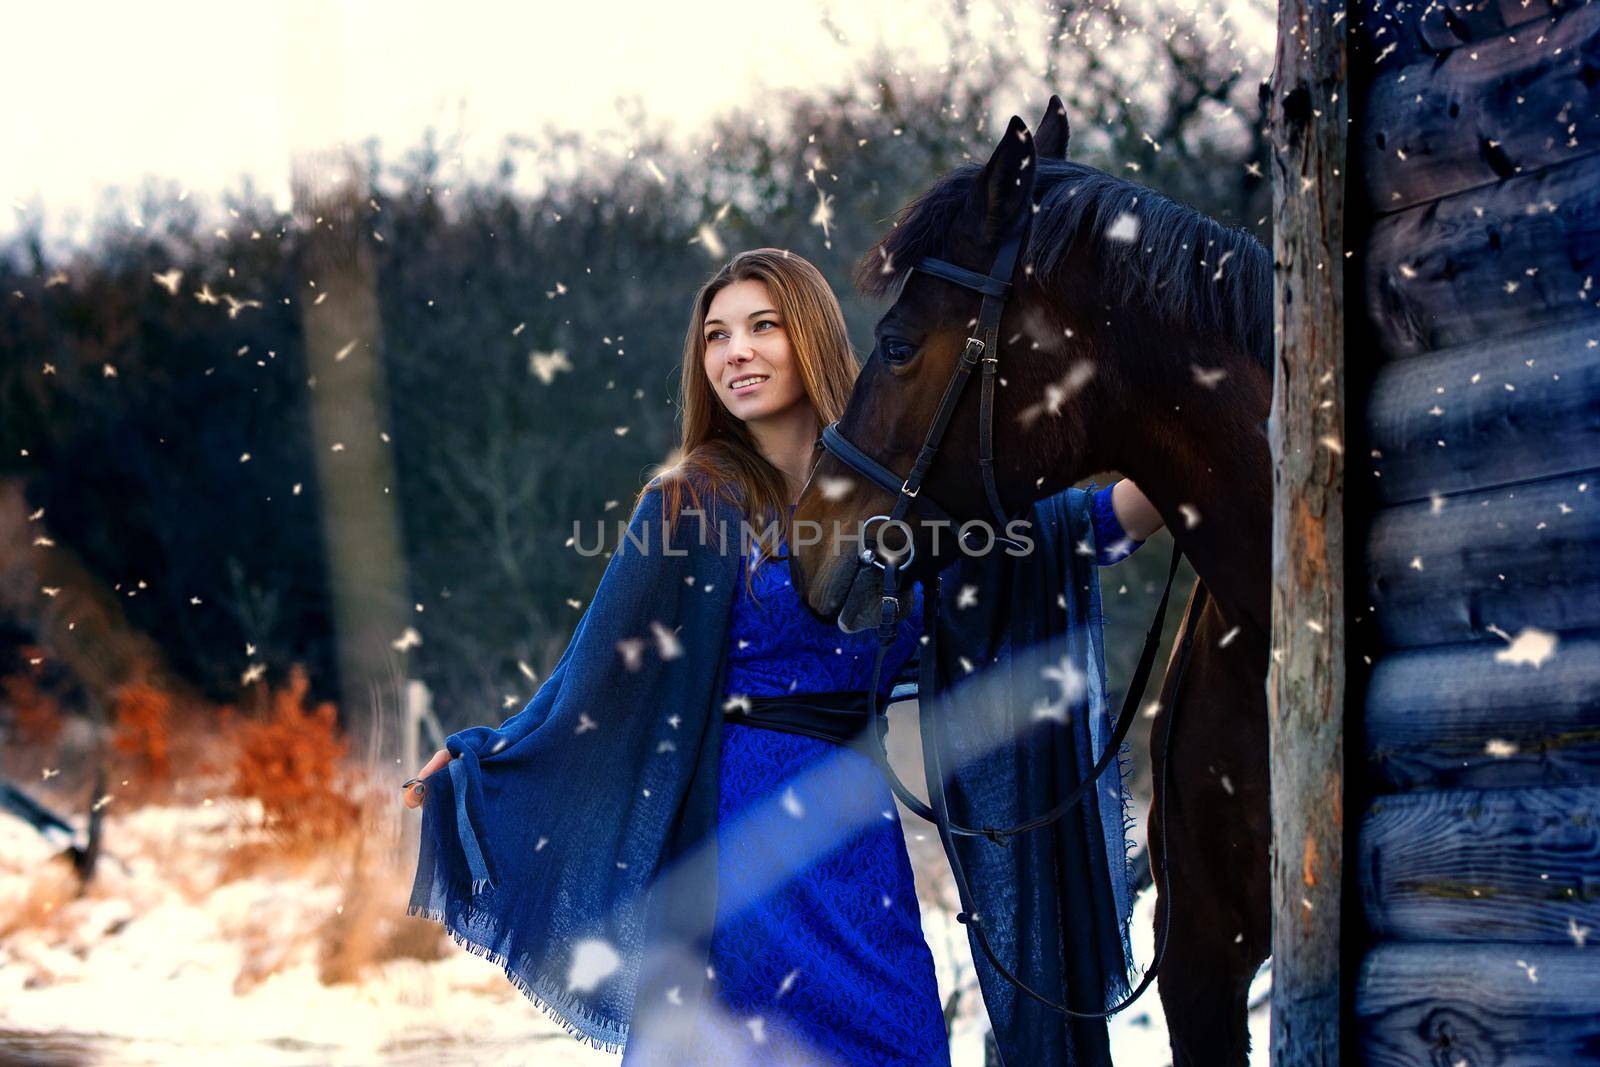 Beautiful girl in a blue stole stands next to a horse near wooden buildings on a snowy winter day